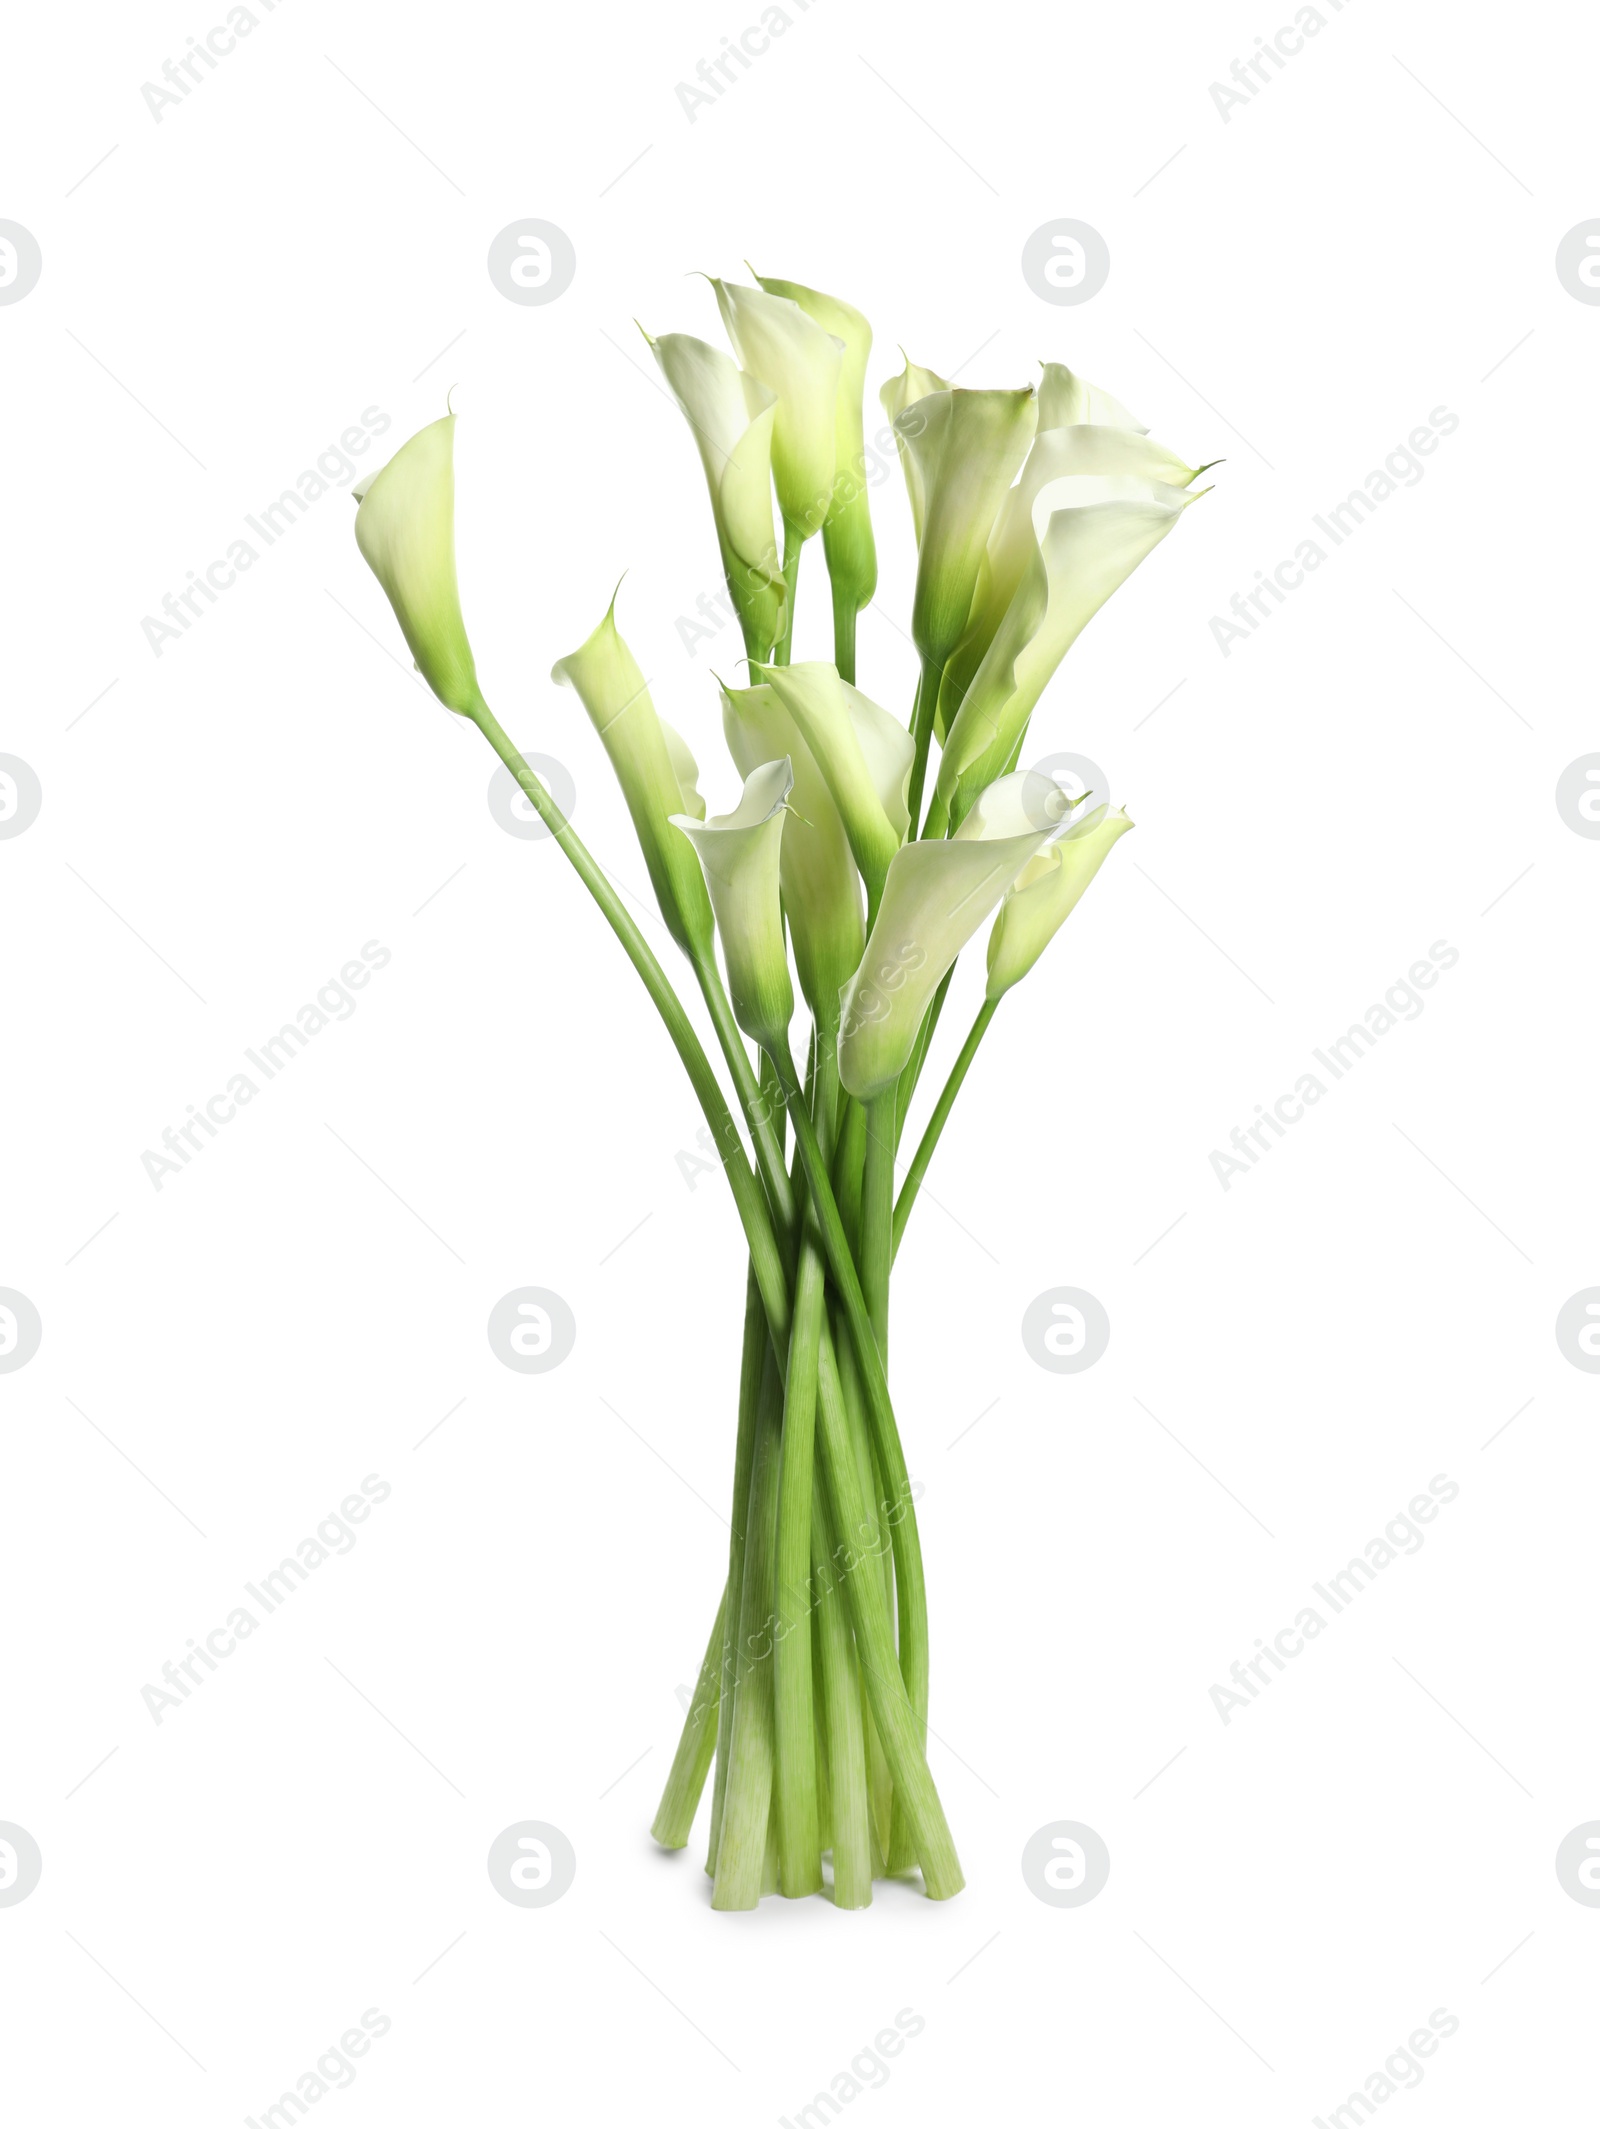 Photo of Bunch of beautiful calla lily flowers on white background